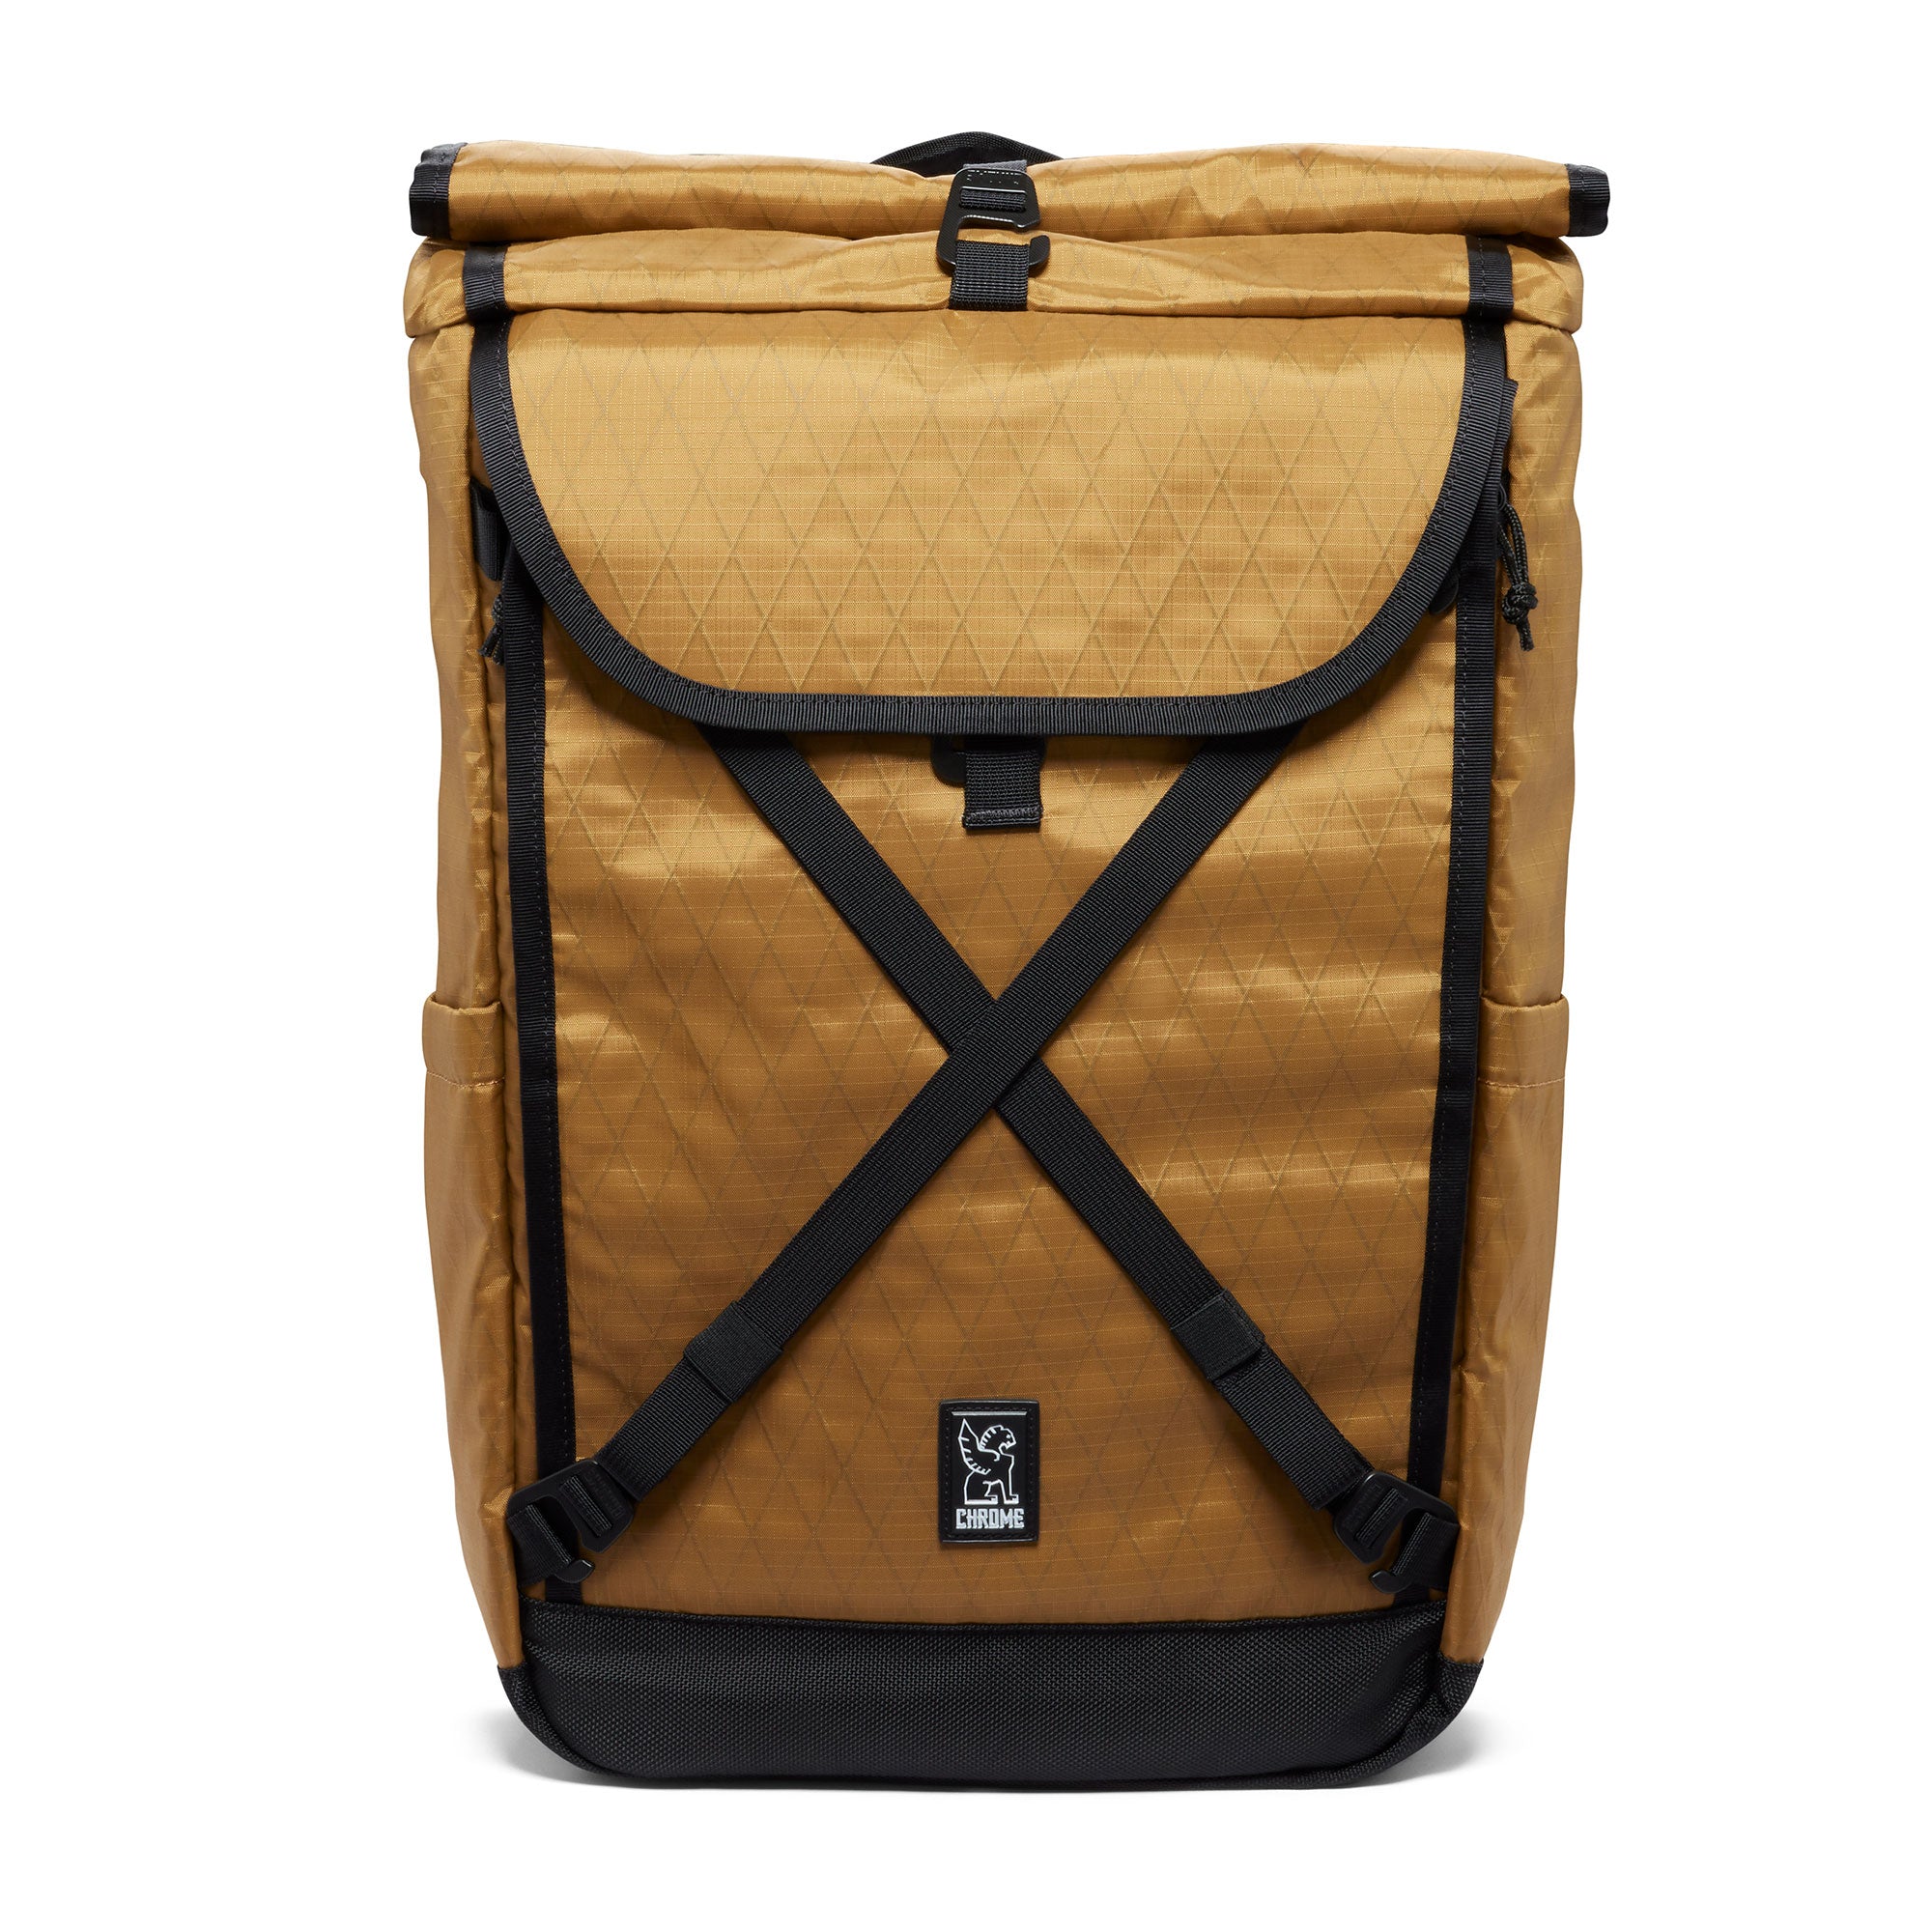 Bravo 4.0 backpack in amber x fabric front view #color_amber x